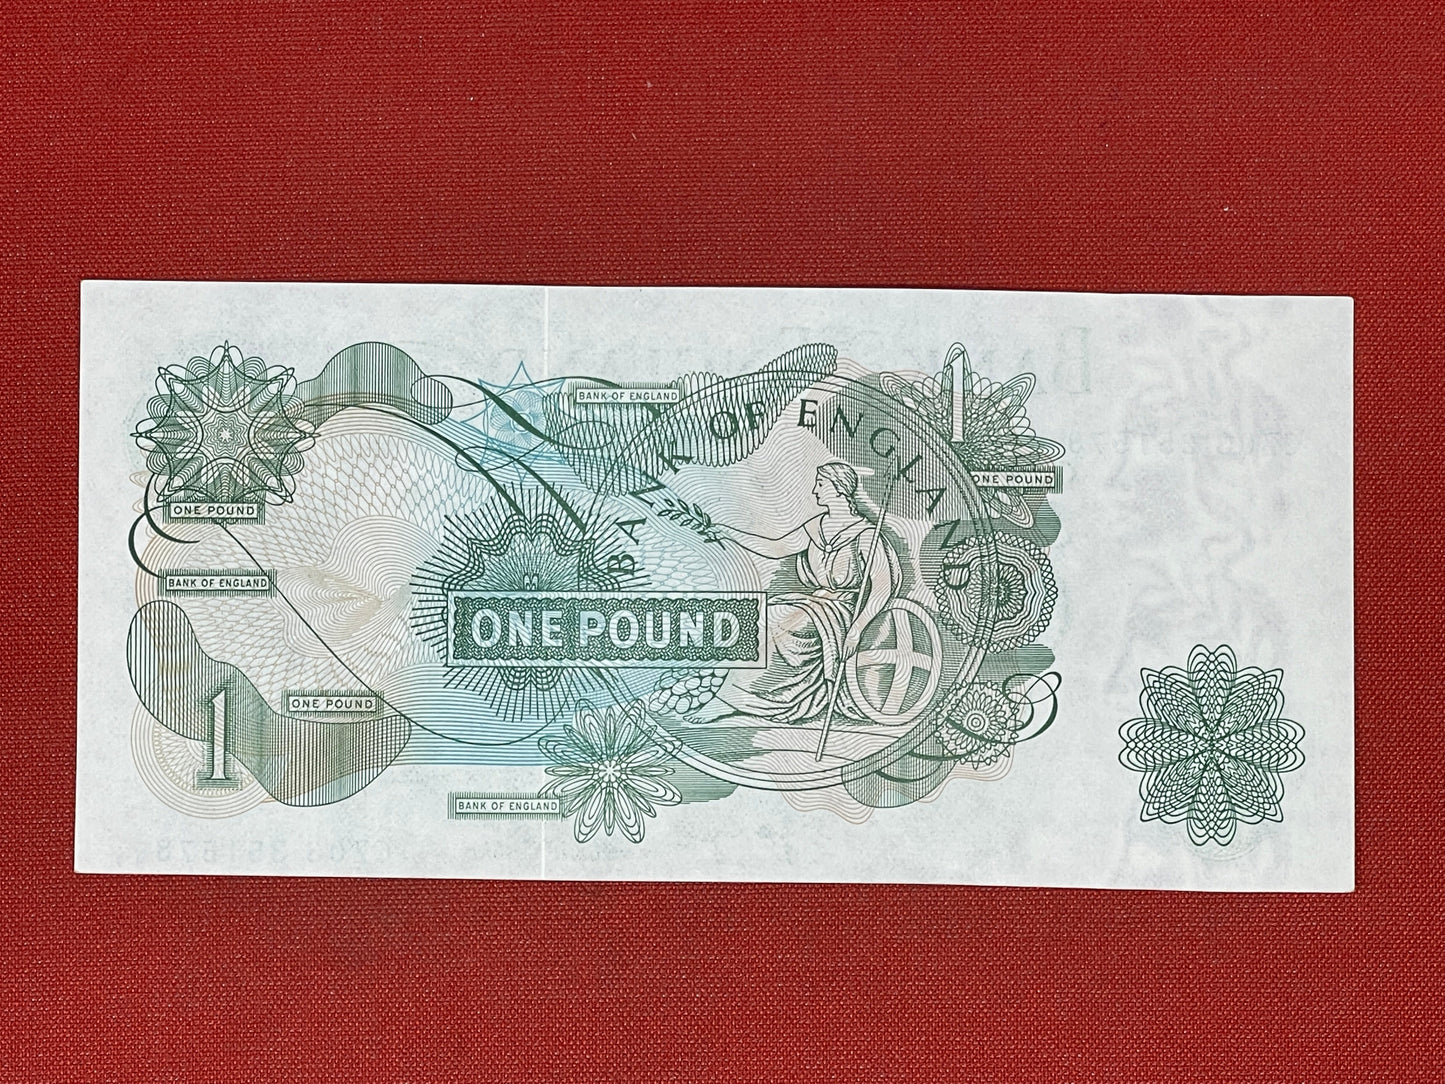 Bank of England £1 Banknote Signed J Page 1970 - 1980 ( Dugg B322 ) 